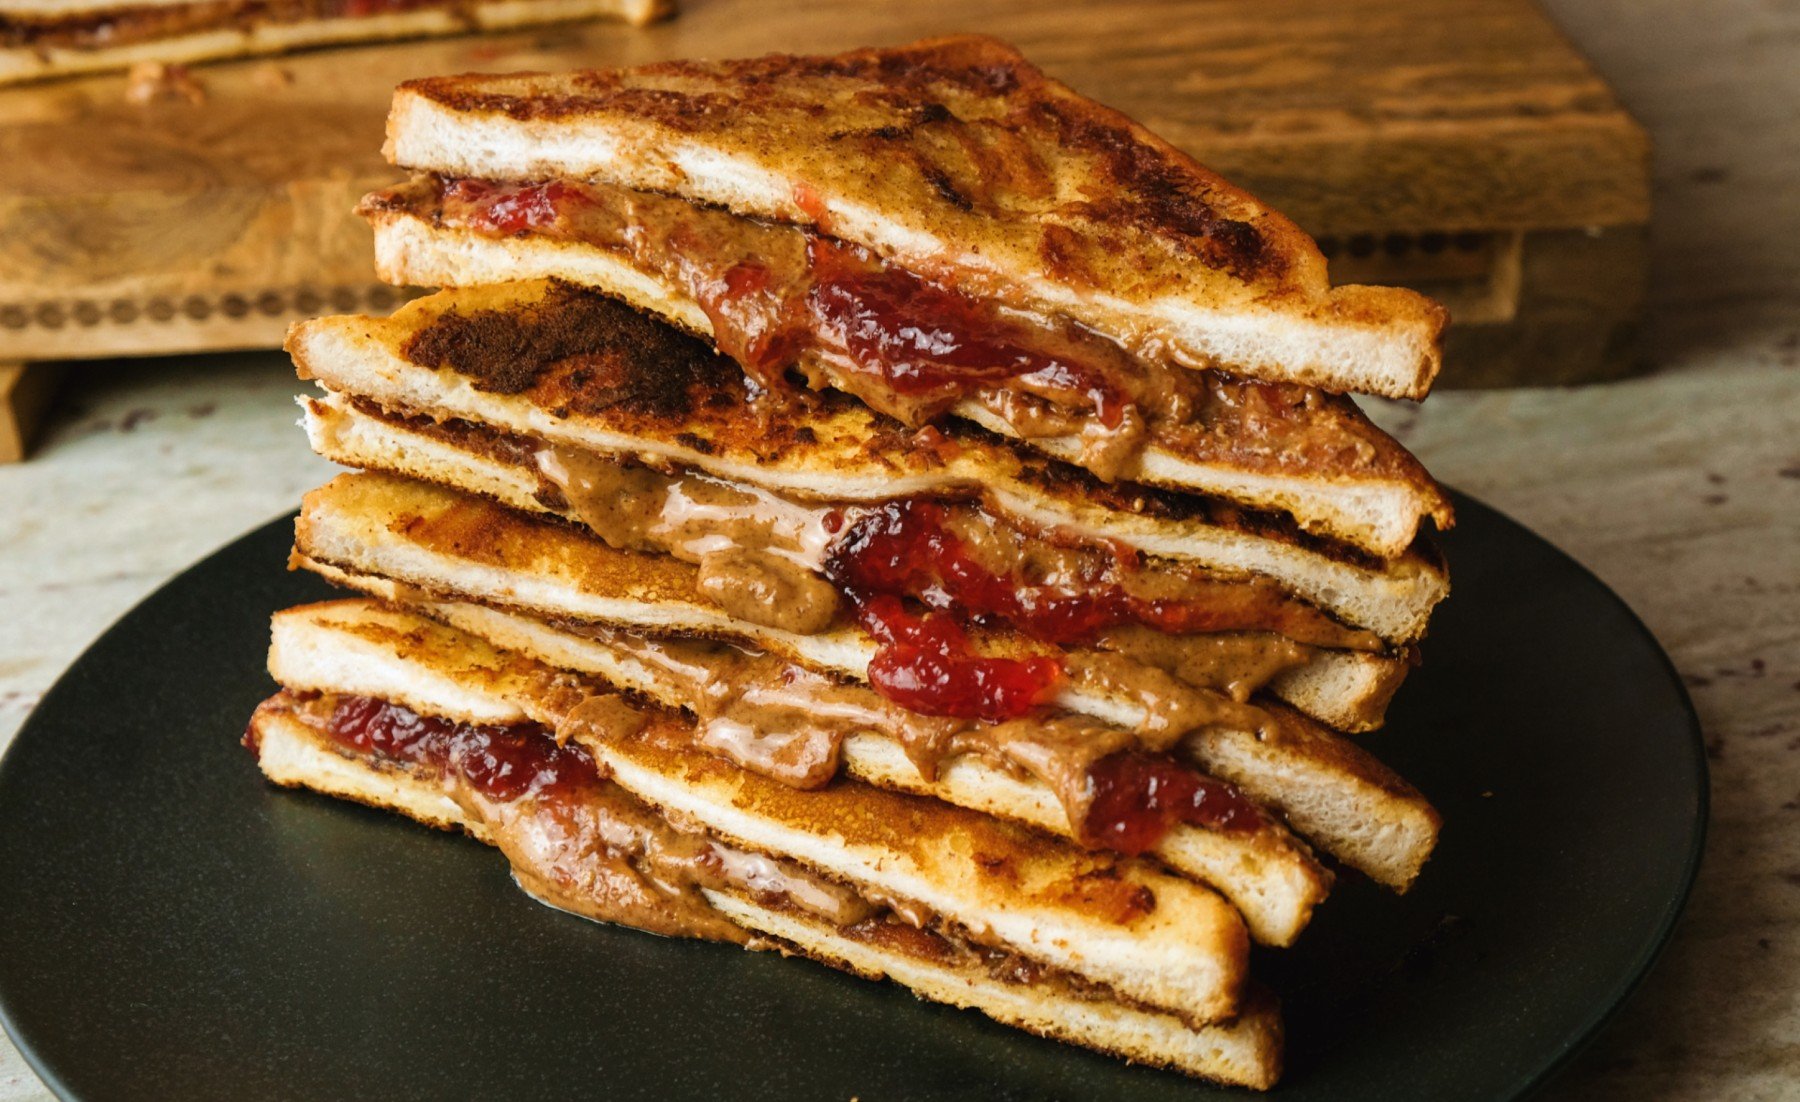 Peanut Butter & Jelly Protein French Toast